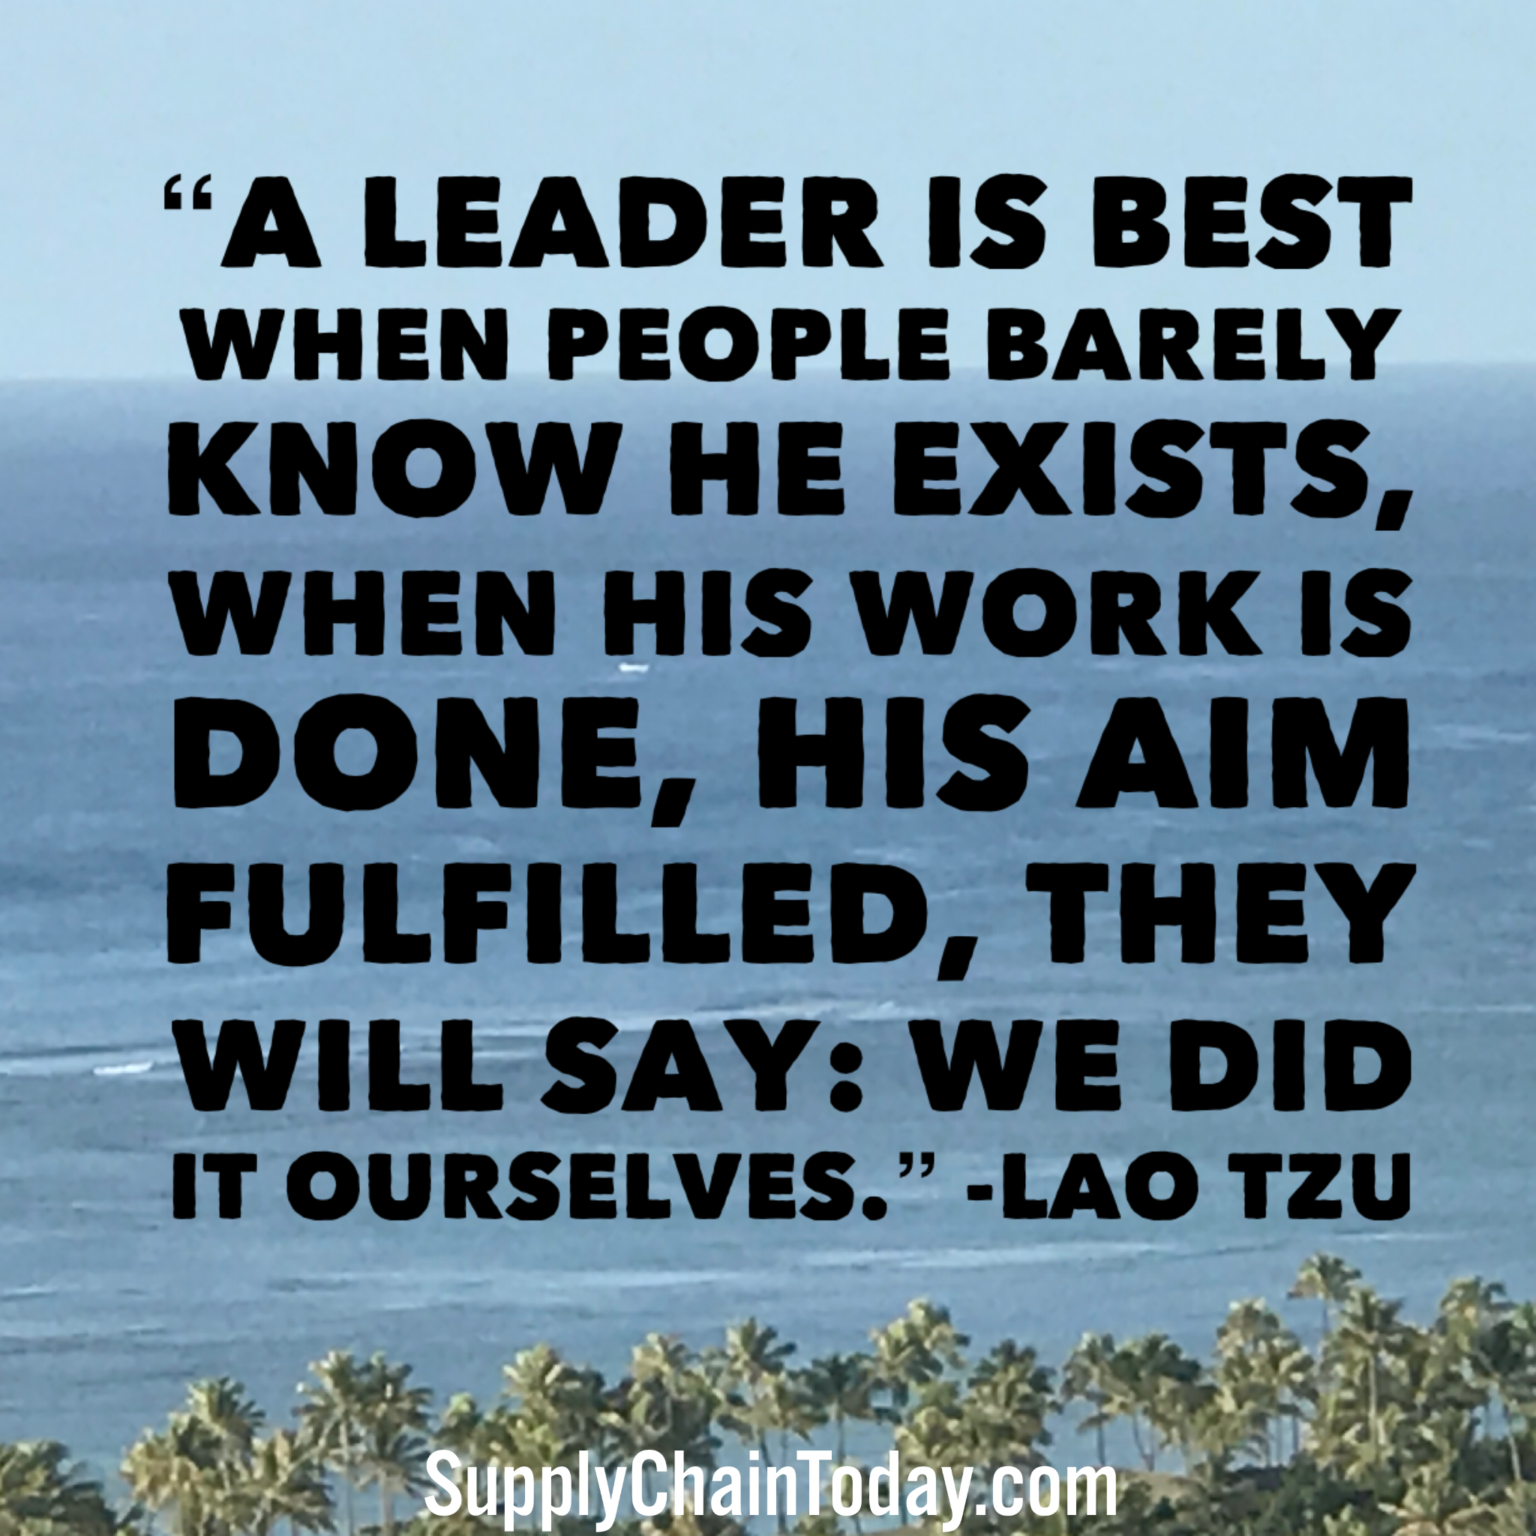 Leadership quotes, CEO quotes, President quotes, Leader quotes